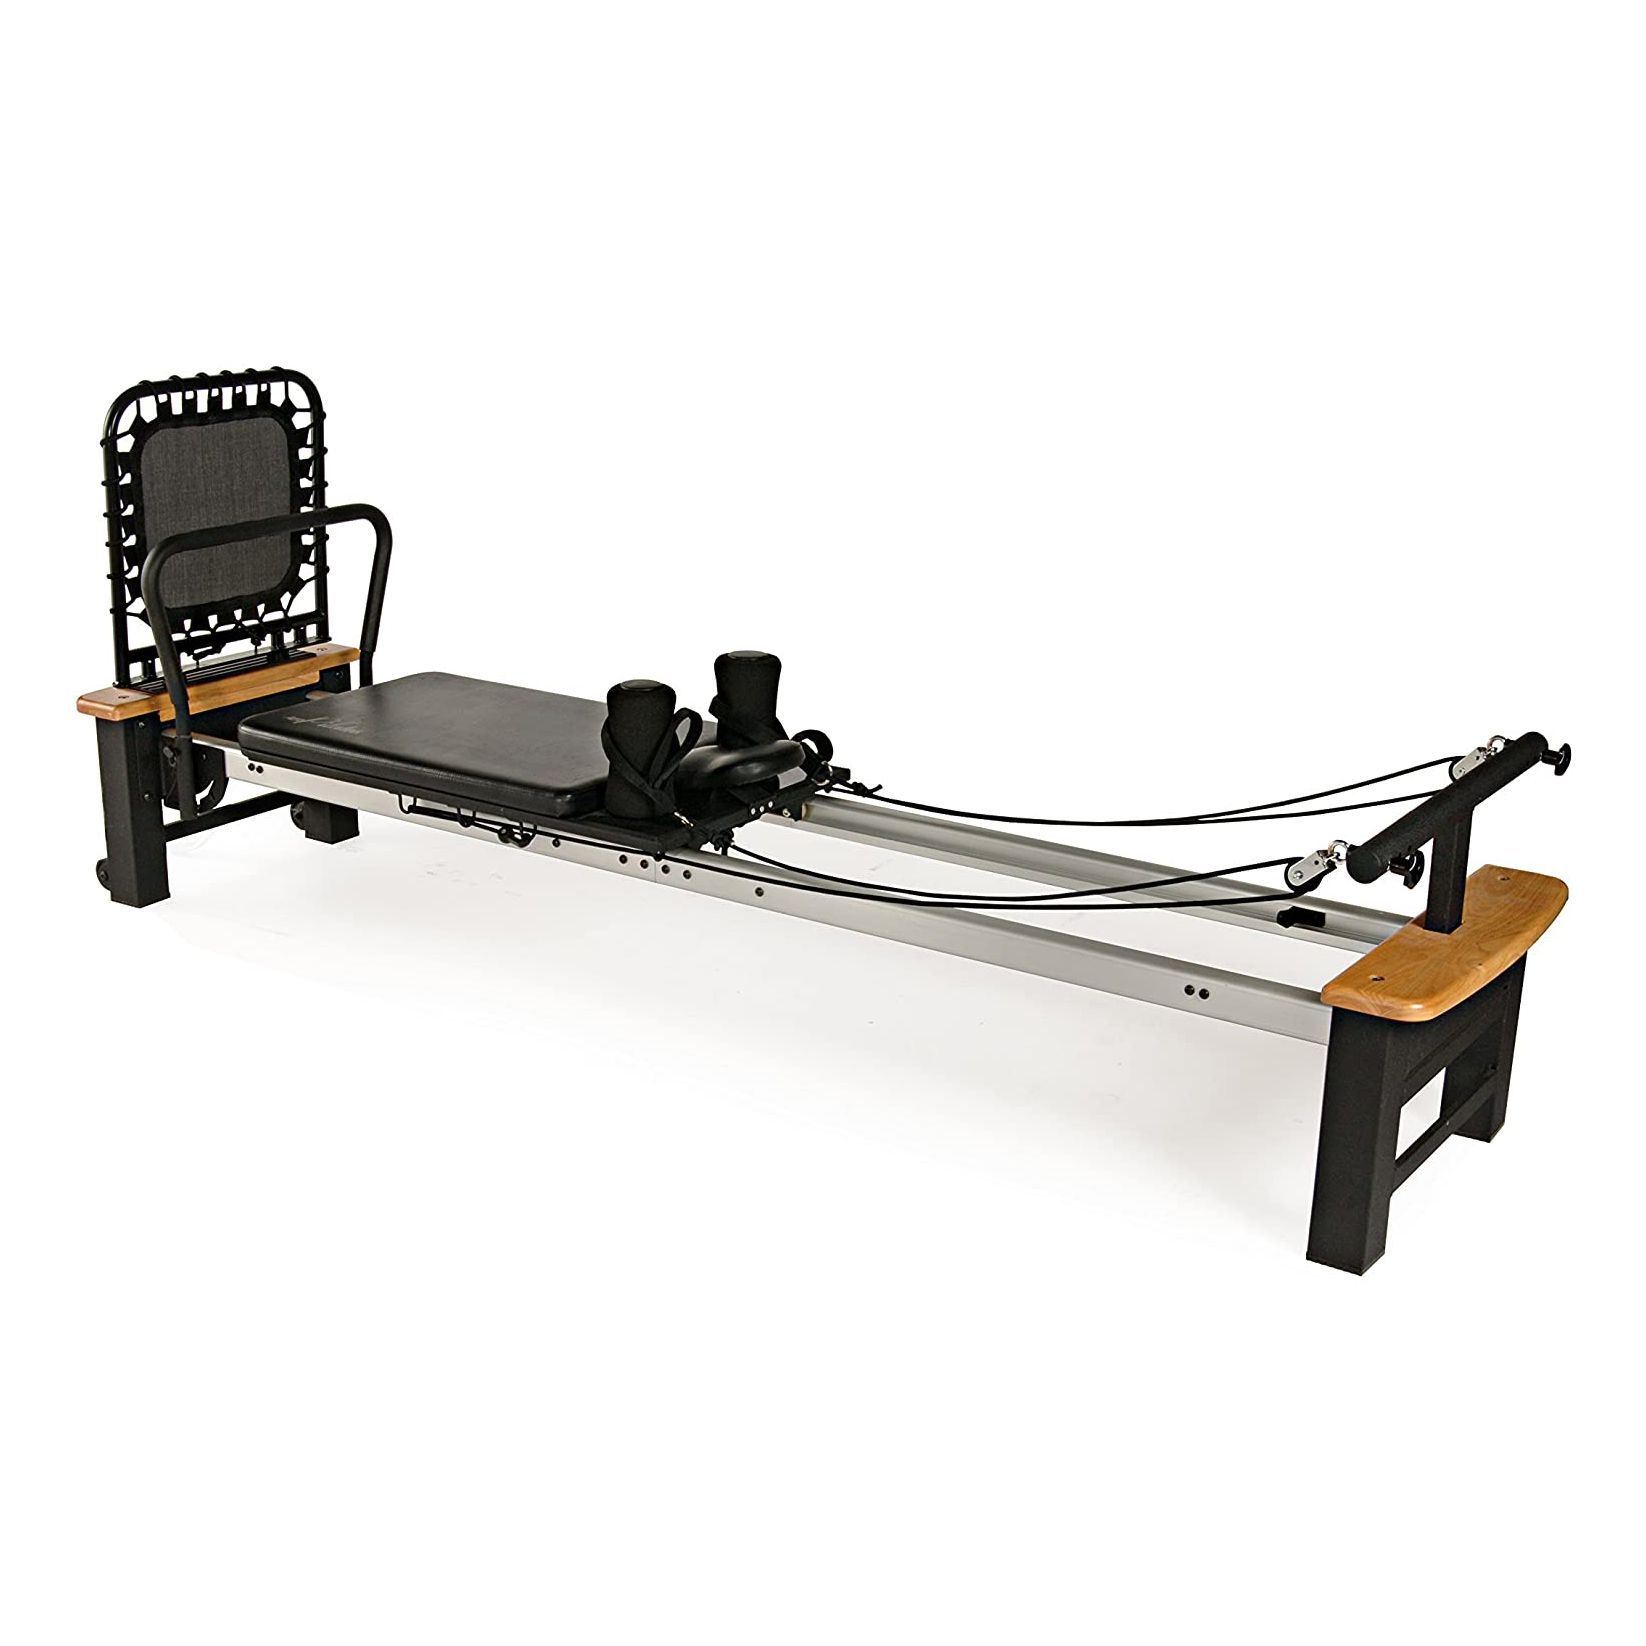 Foverós Pilates Fitness Reformer All-in-One Pilates Home Workout System 